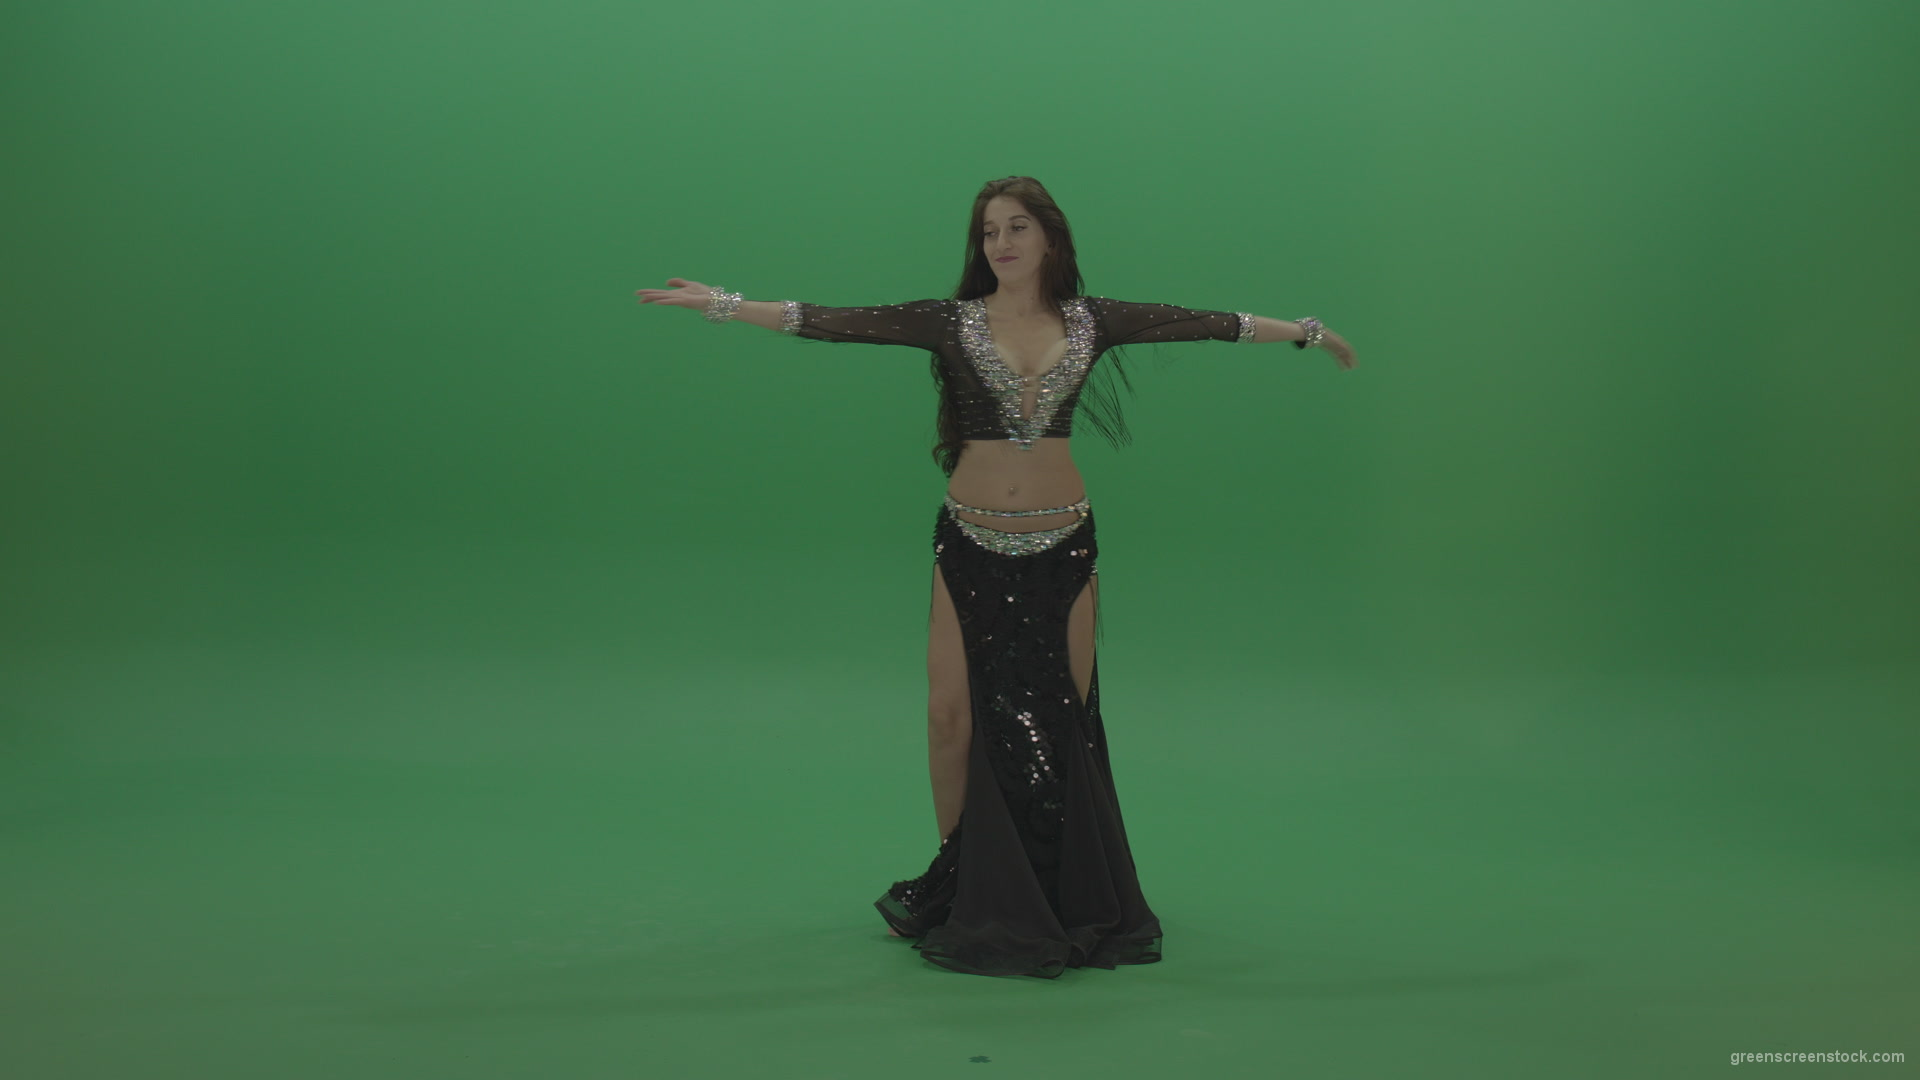 Appealing-belly-dancer-in-black-wear-display-amazing-dance-moves-over-chromakey-background_002 Green Screen Stock